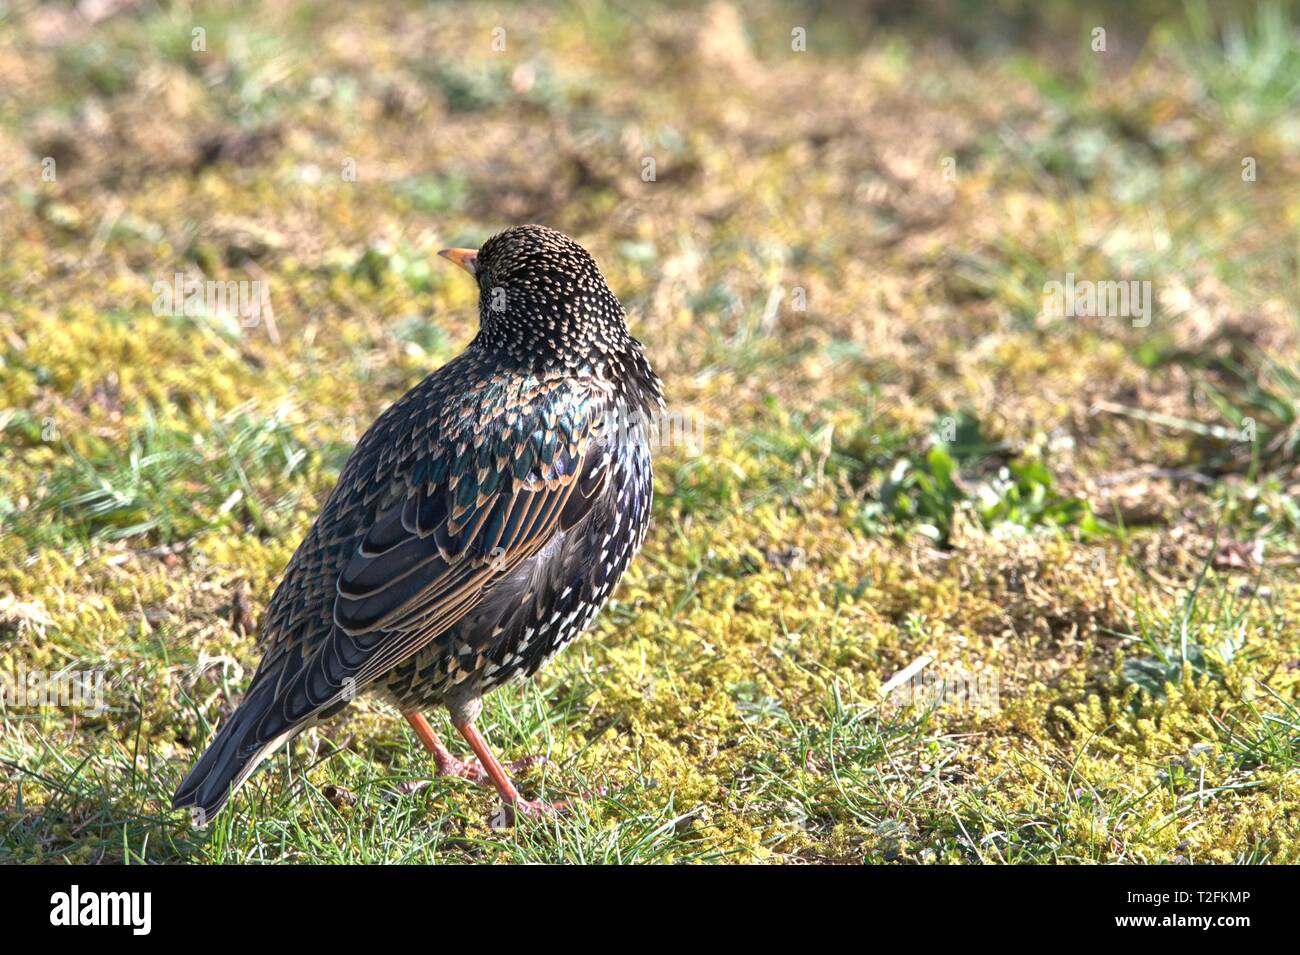 Schleswig, Deutschland. 31st Mar, 2019. A star (Sturnus vulgaris) in the transition from a simple dress to a magnificent dress while foraging on the ground on the Konigswiesen in Schleswig. Order: Passeriformes, Suborder: Songbird (Passeri), Family: Stare (Sturnidae), Subfamily: Sturninae, Genus: Sturnus, Species: Star | usage worldwide Credit: dpa/Alamy Live News Stock Photo